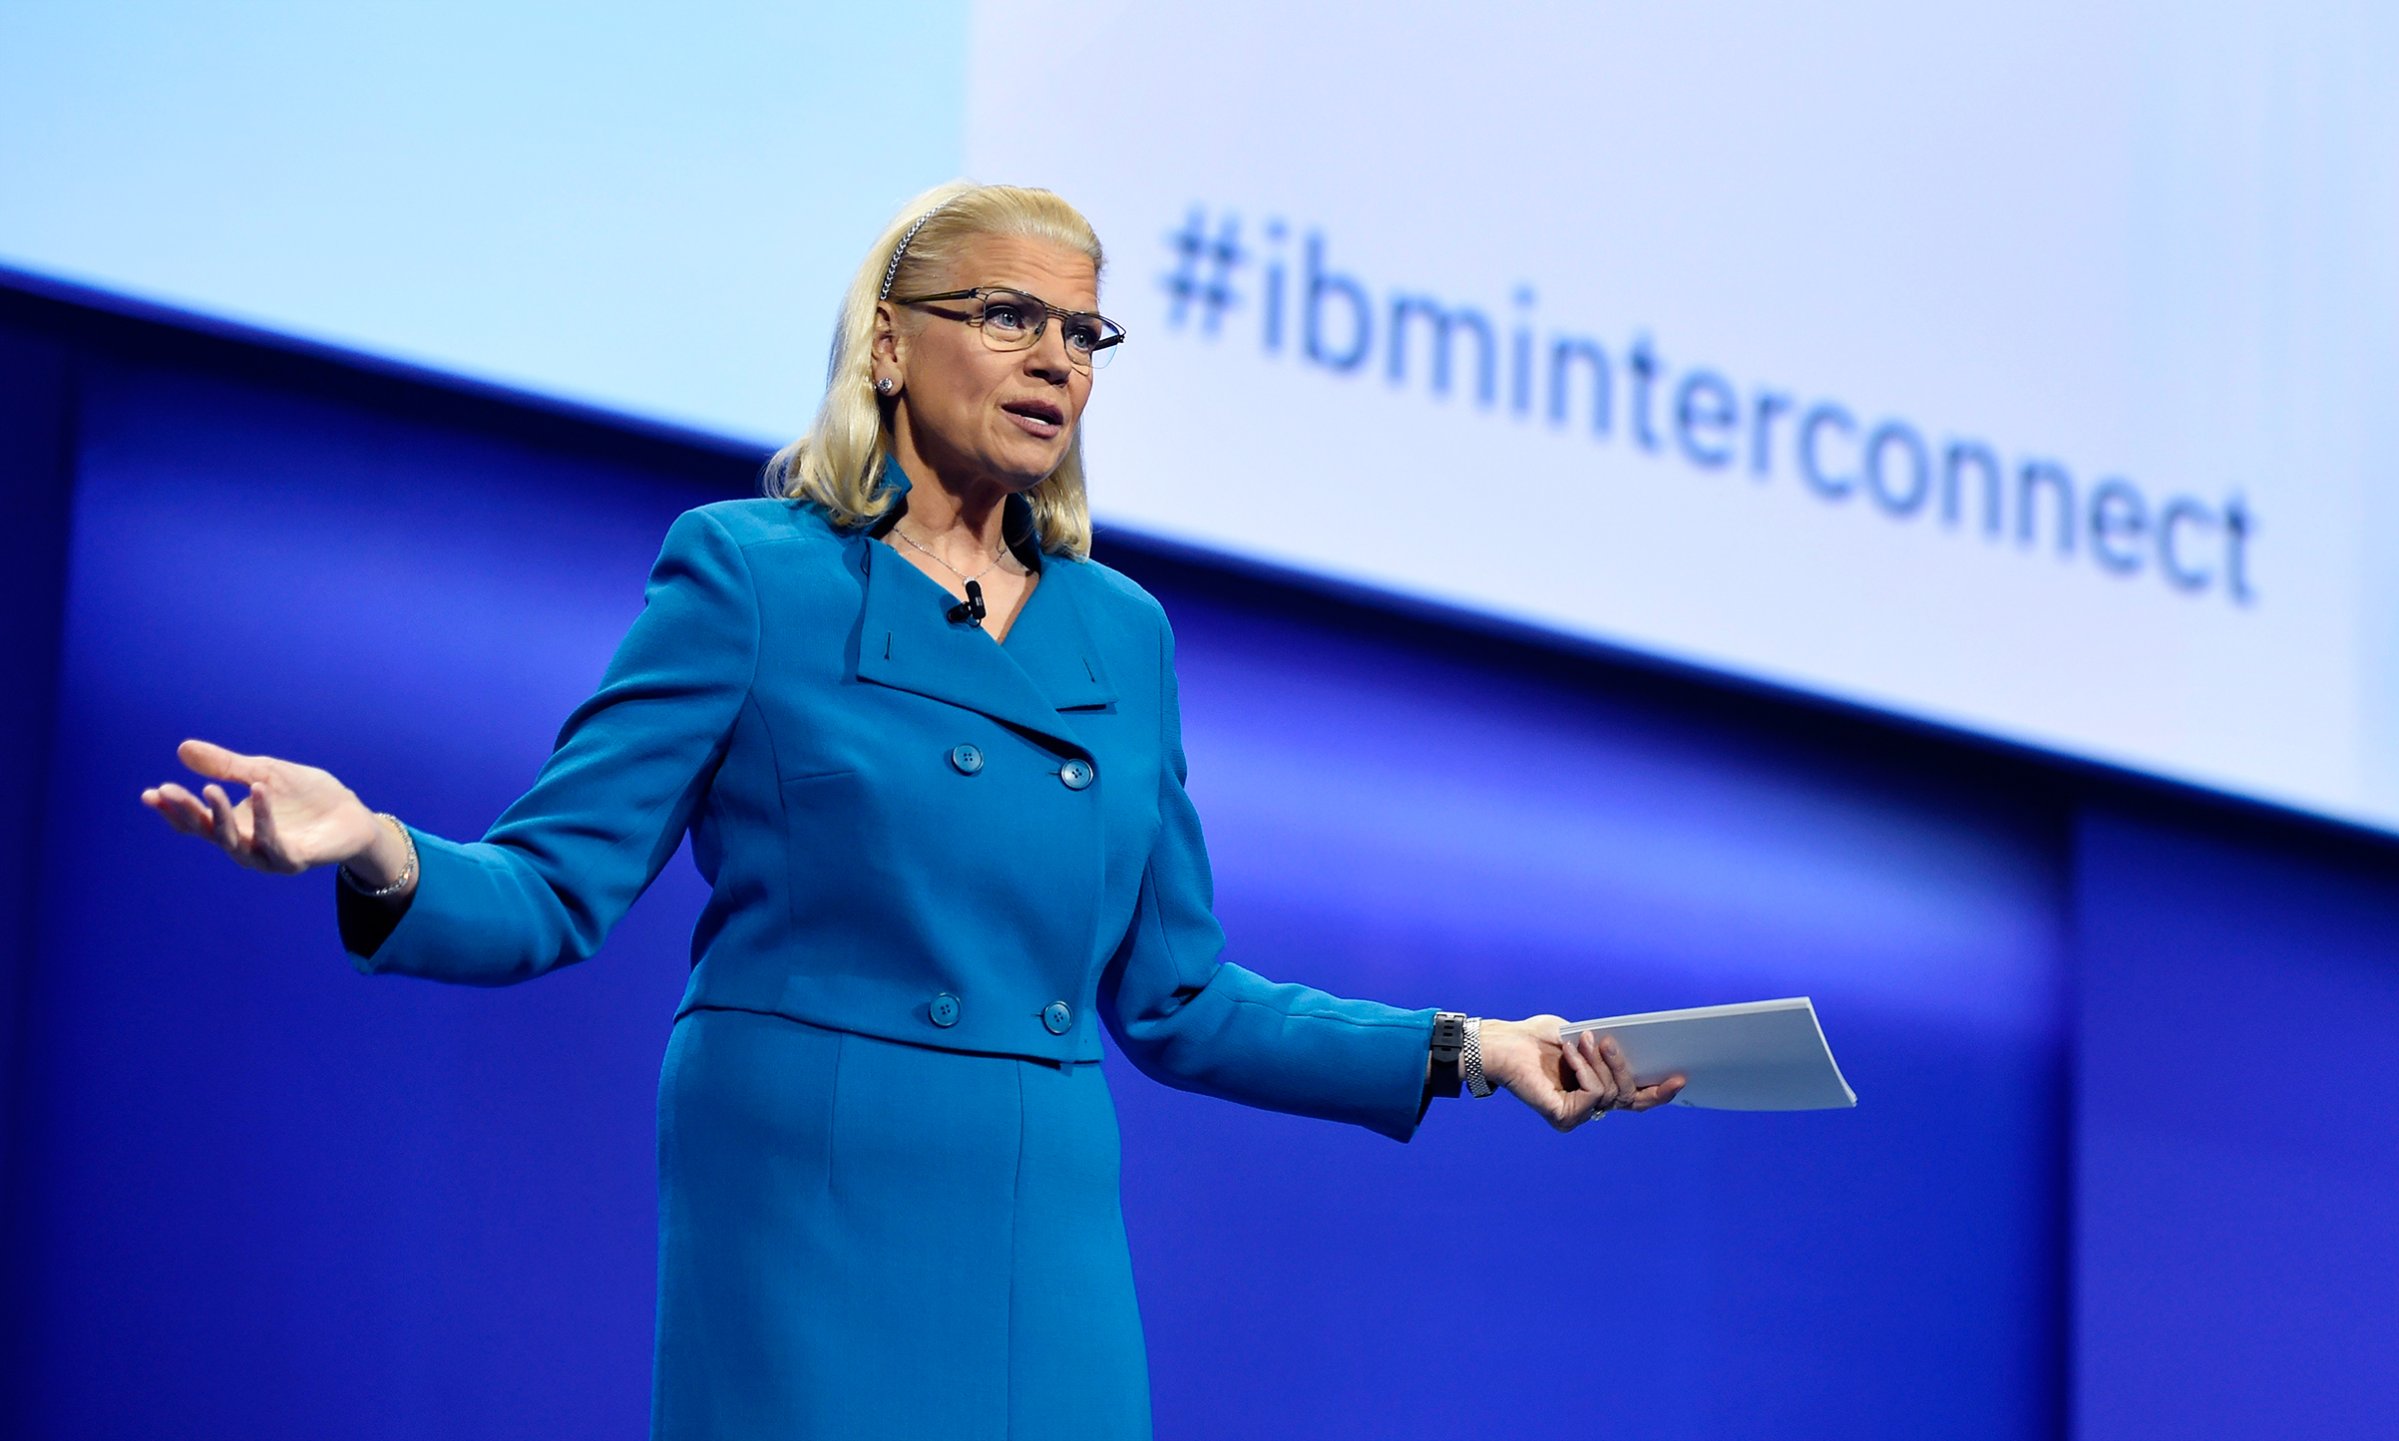 Ginni Rometty, chief executive officer of IBM, speaks during the IBM InterConnect 2017